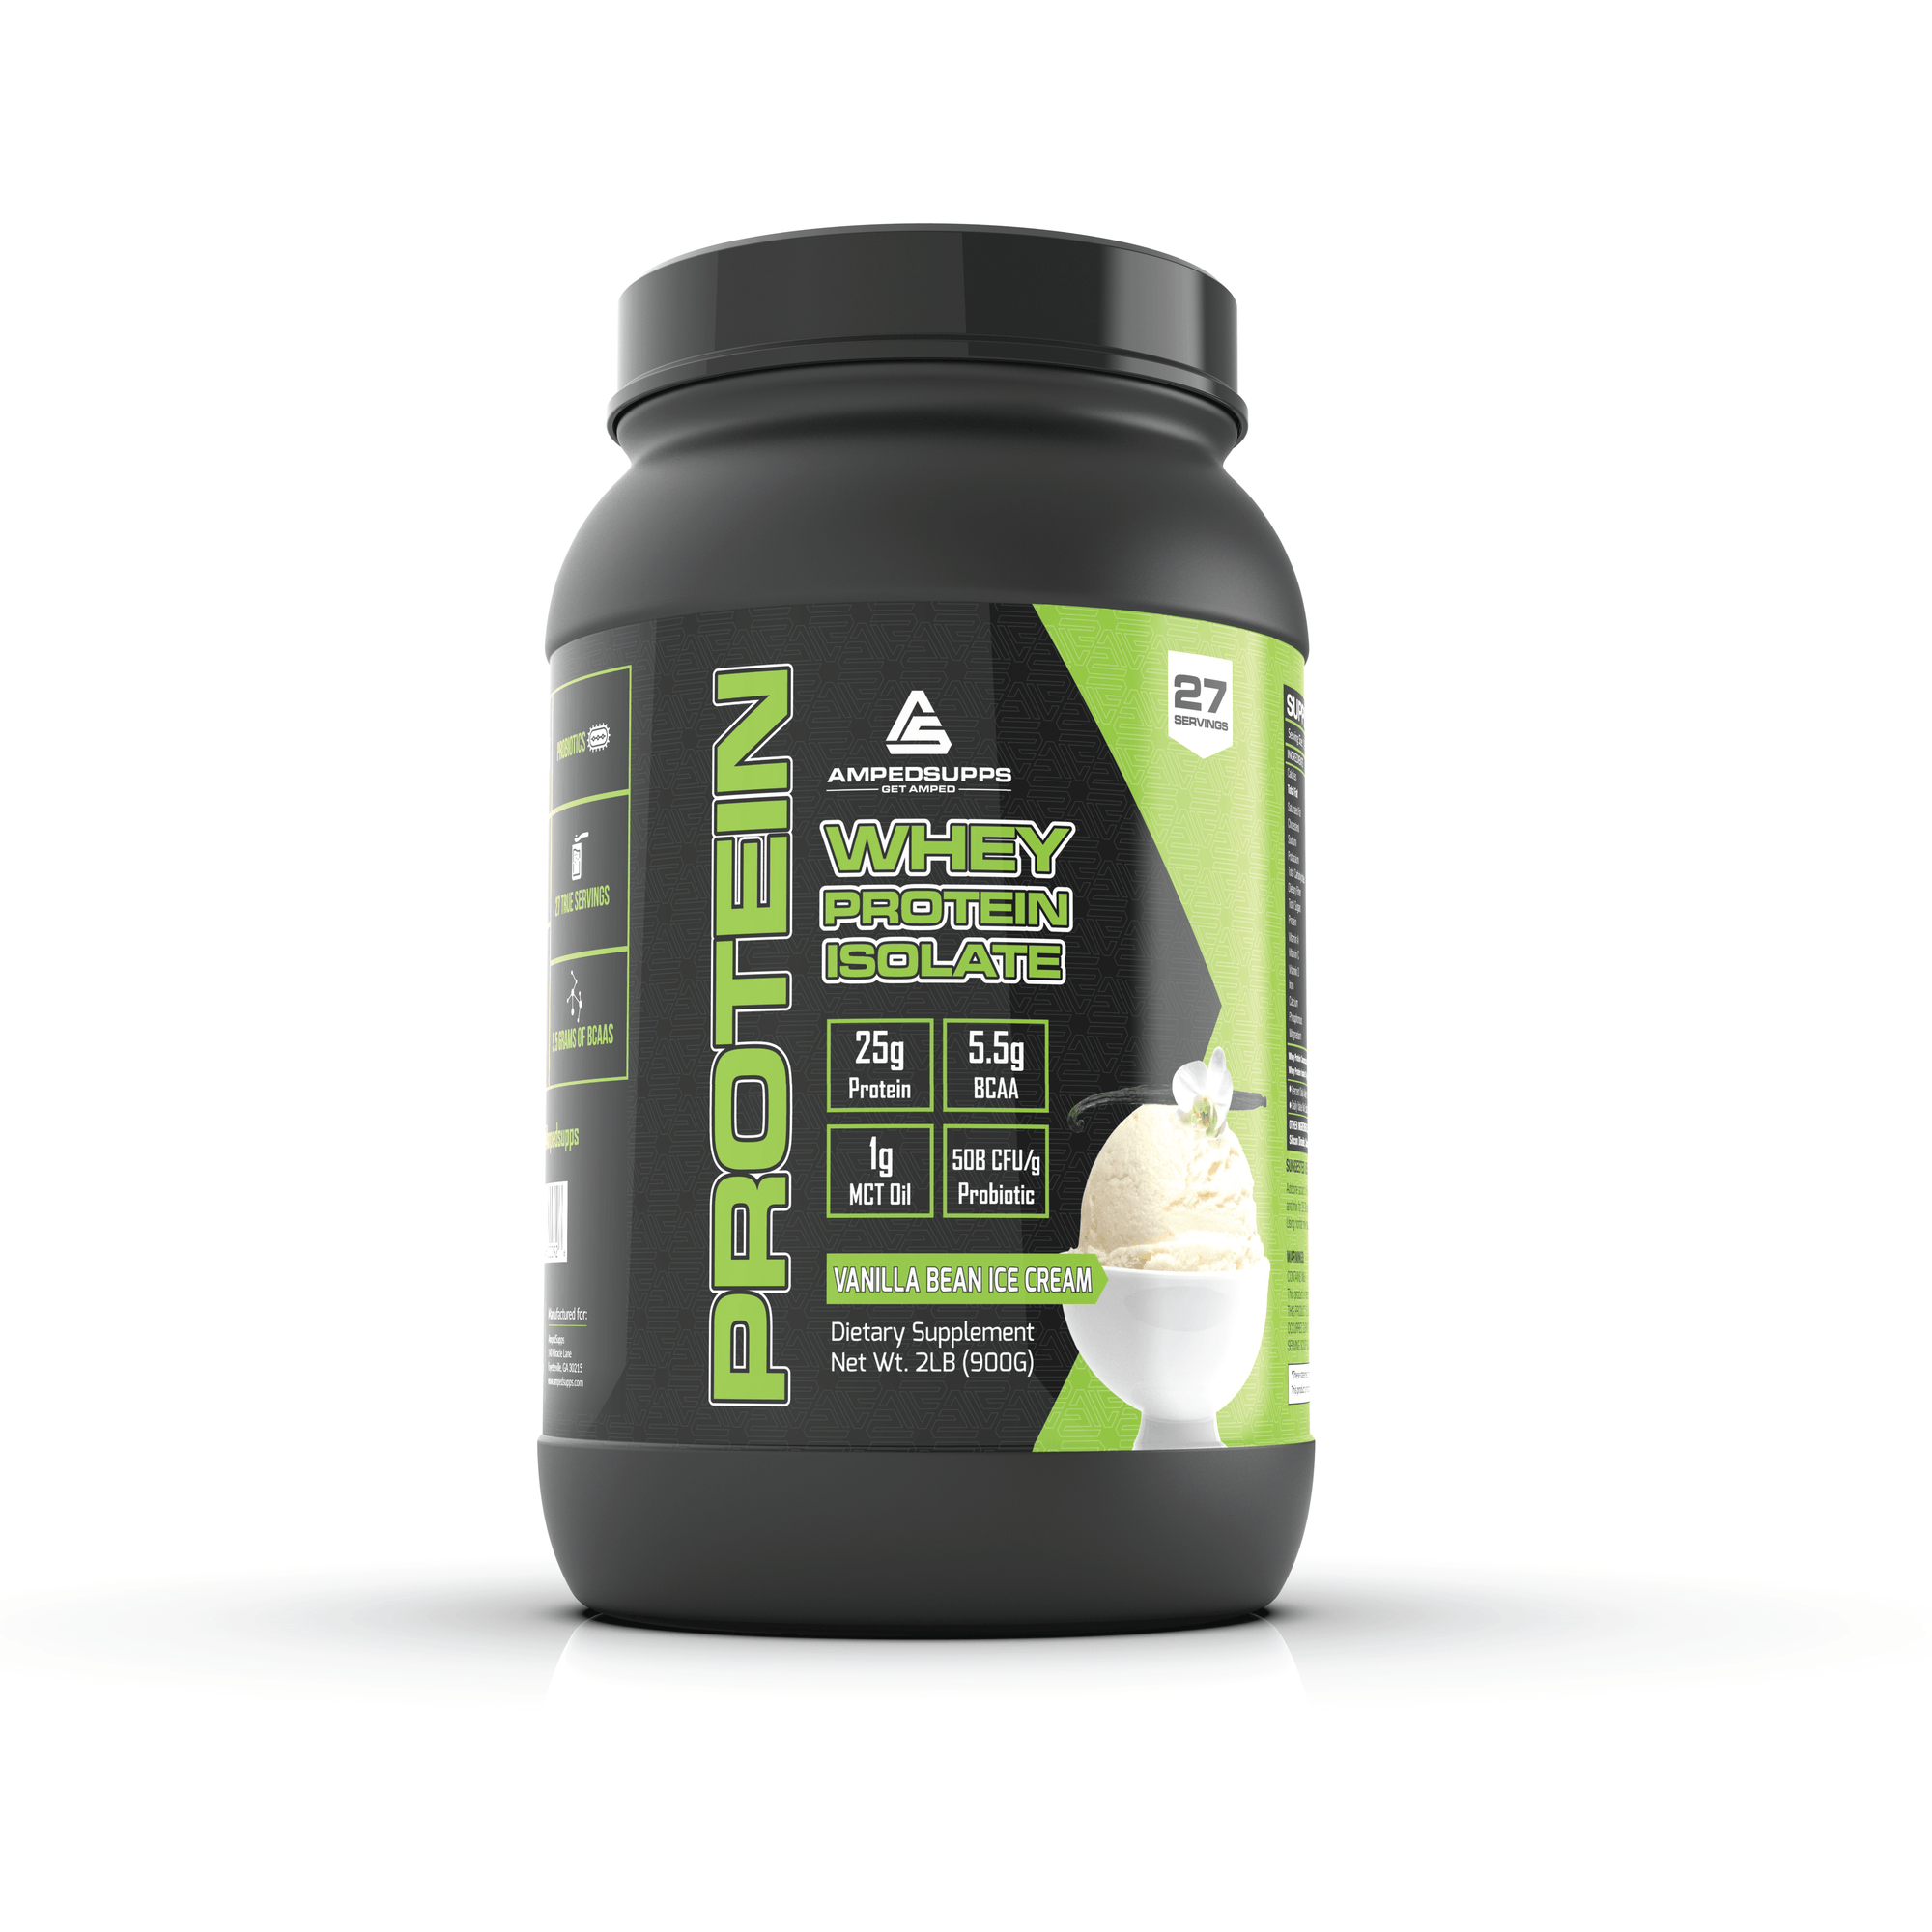 AmpedSupps™ Whey Protein Isolate - AmpedSupps